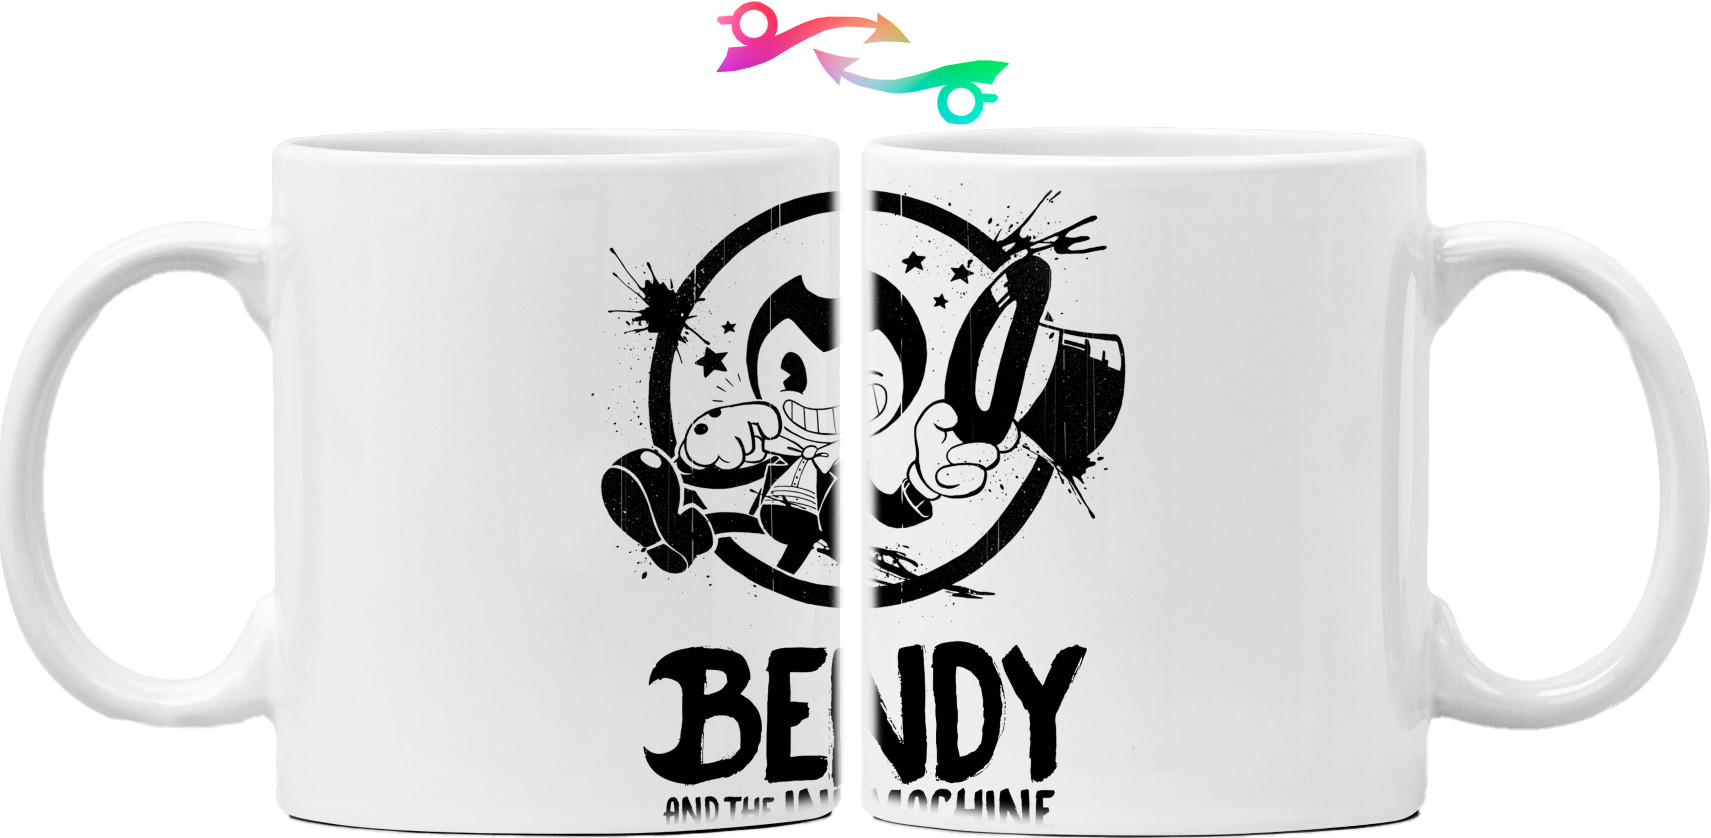 Bendy and the Ink Machine 32